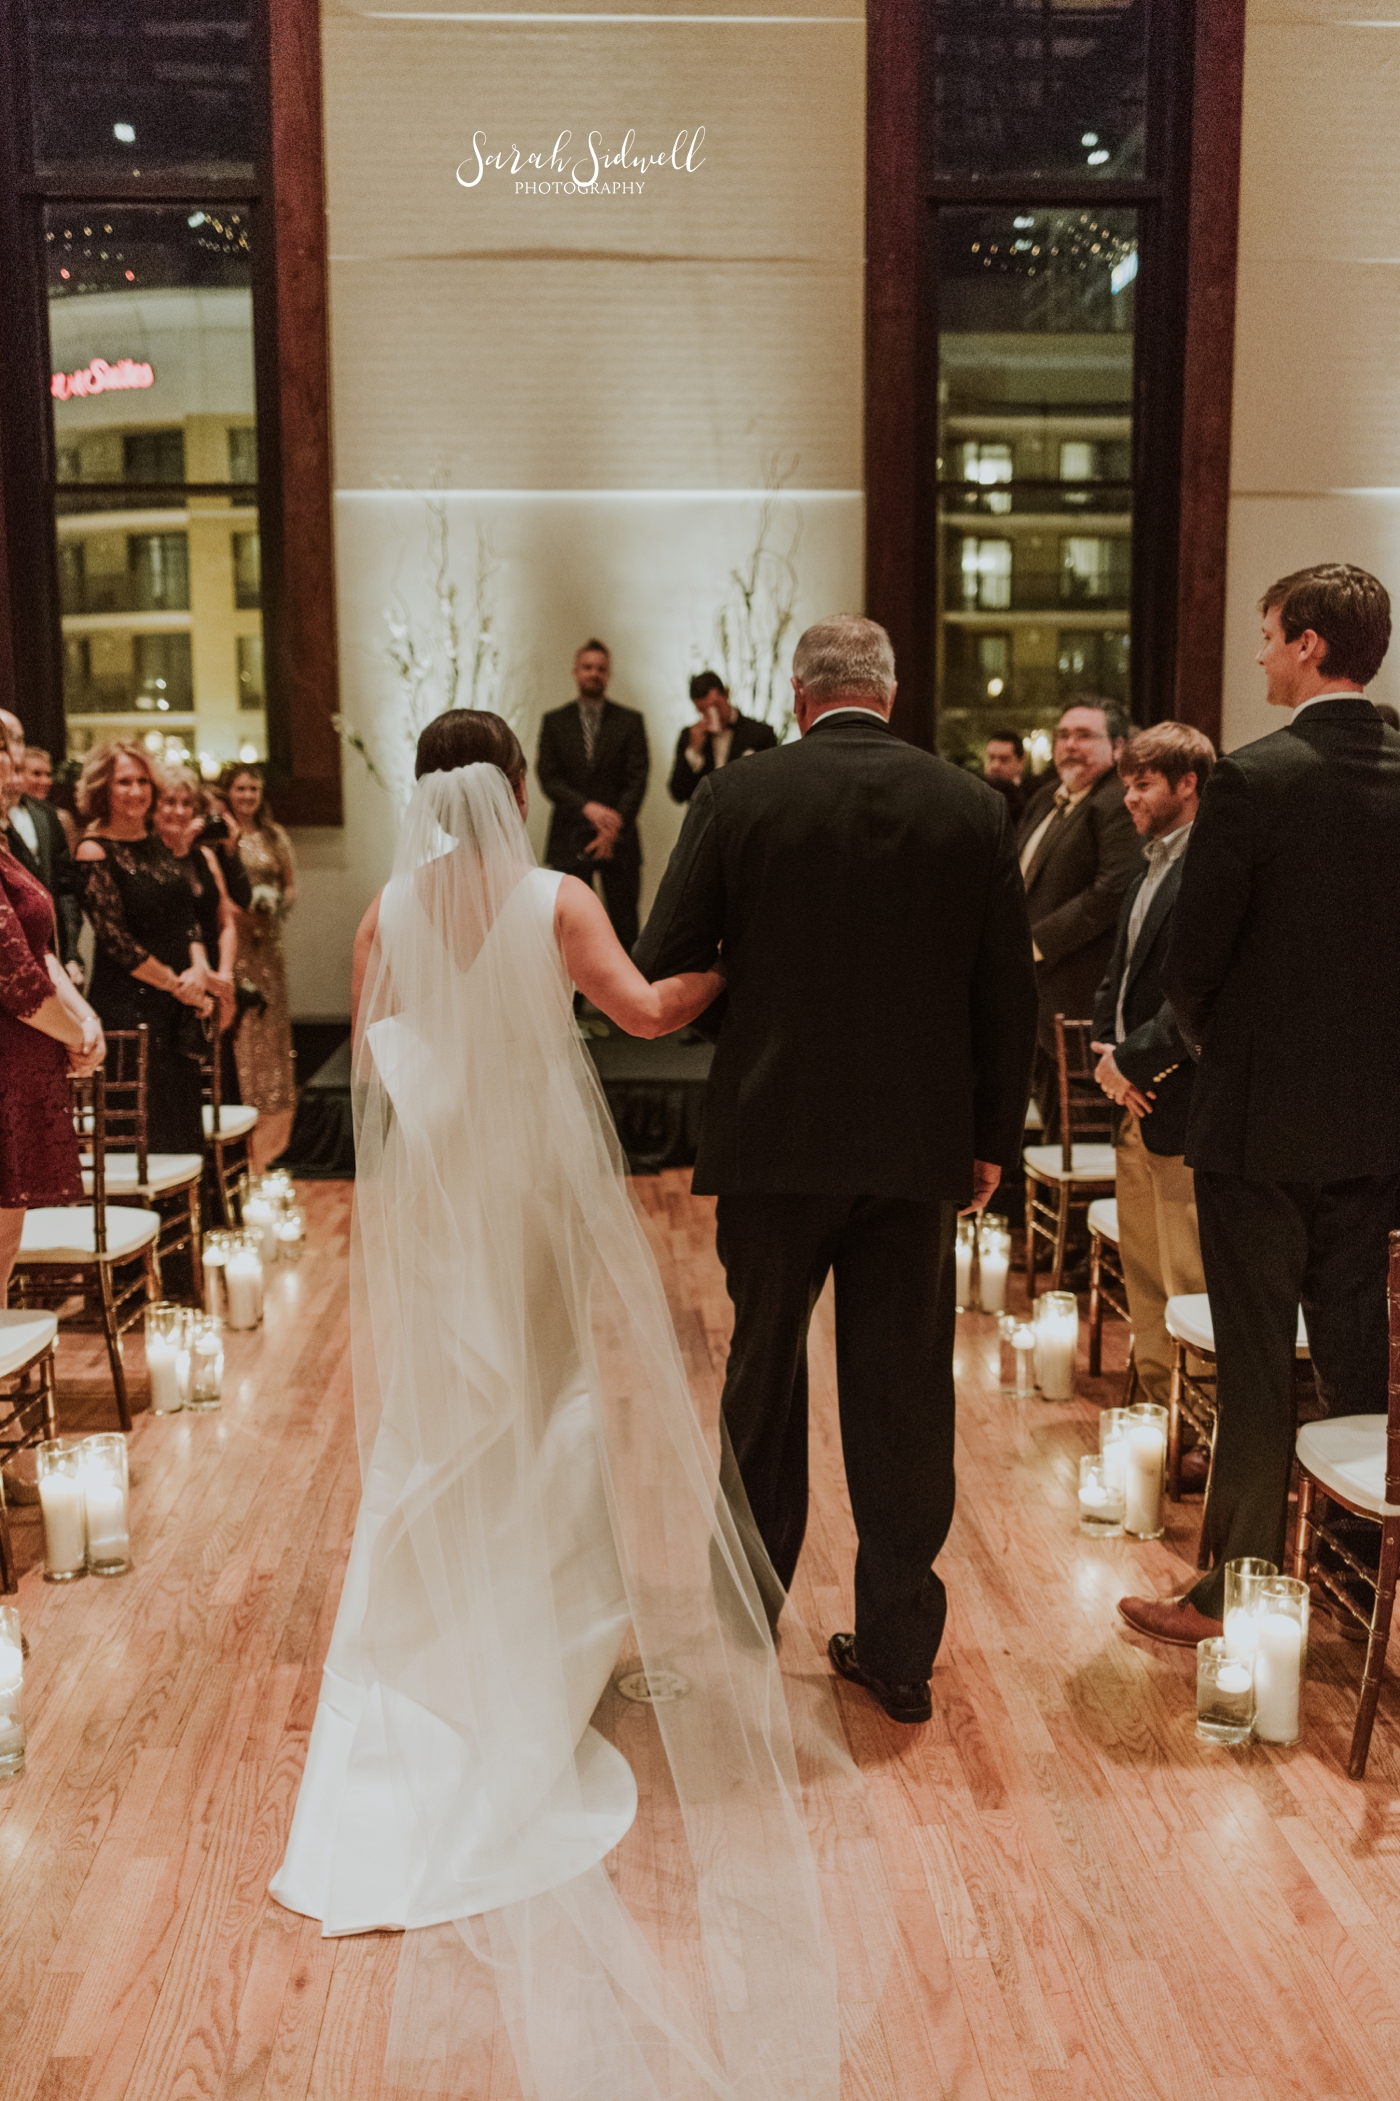 A bride walks down the aisle | Sarah Sidwell Photography | The Bell Tower